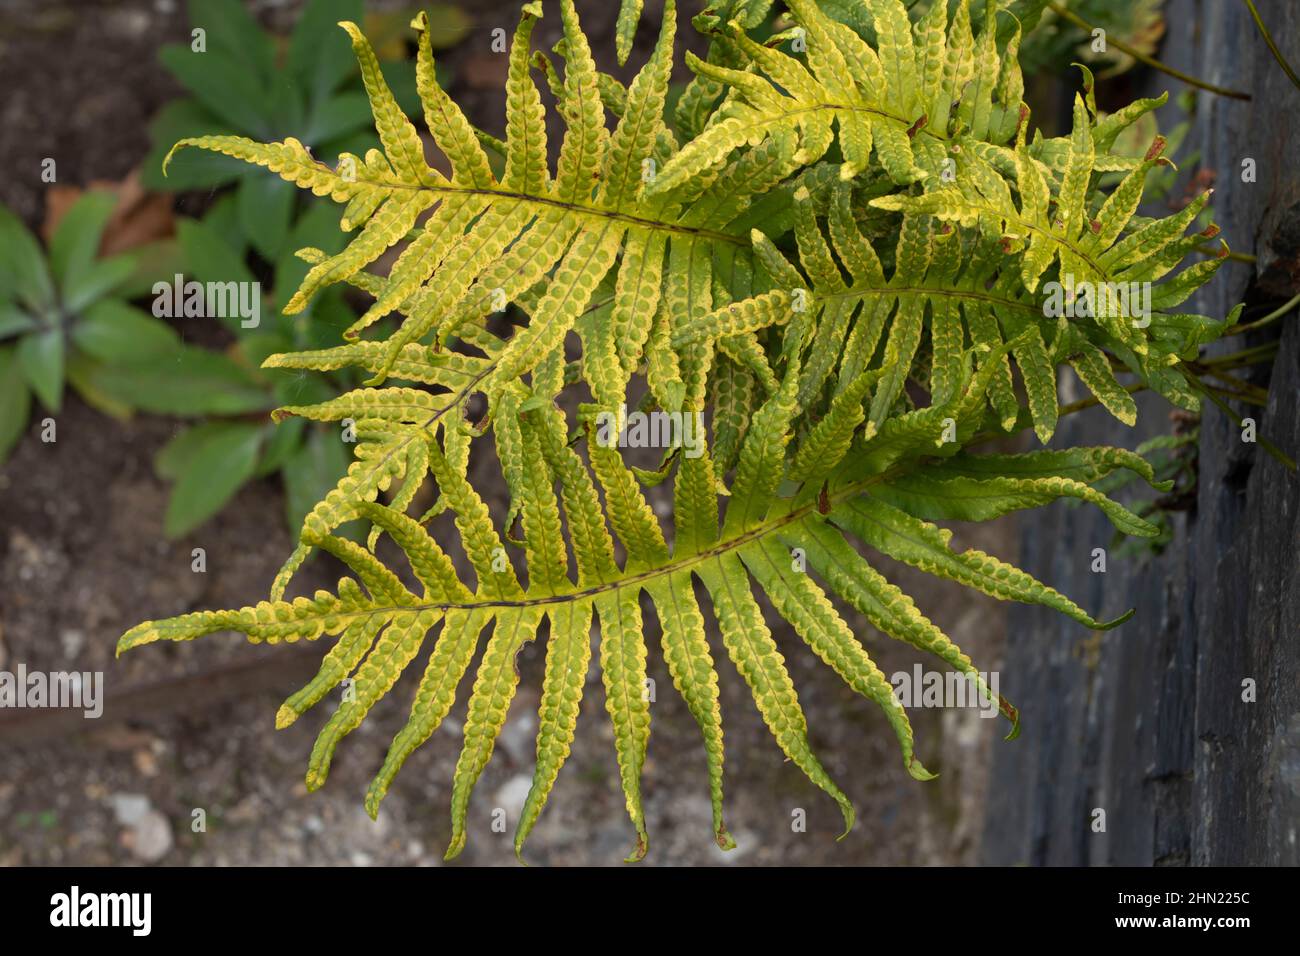 Polypodium vulgare or common polypody bright yellow green fern with spores on the garden wall Stock Photo